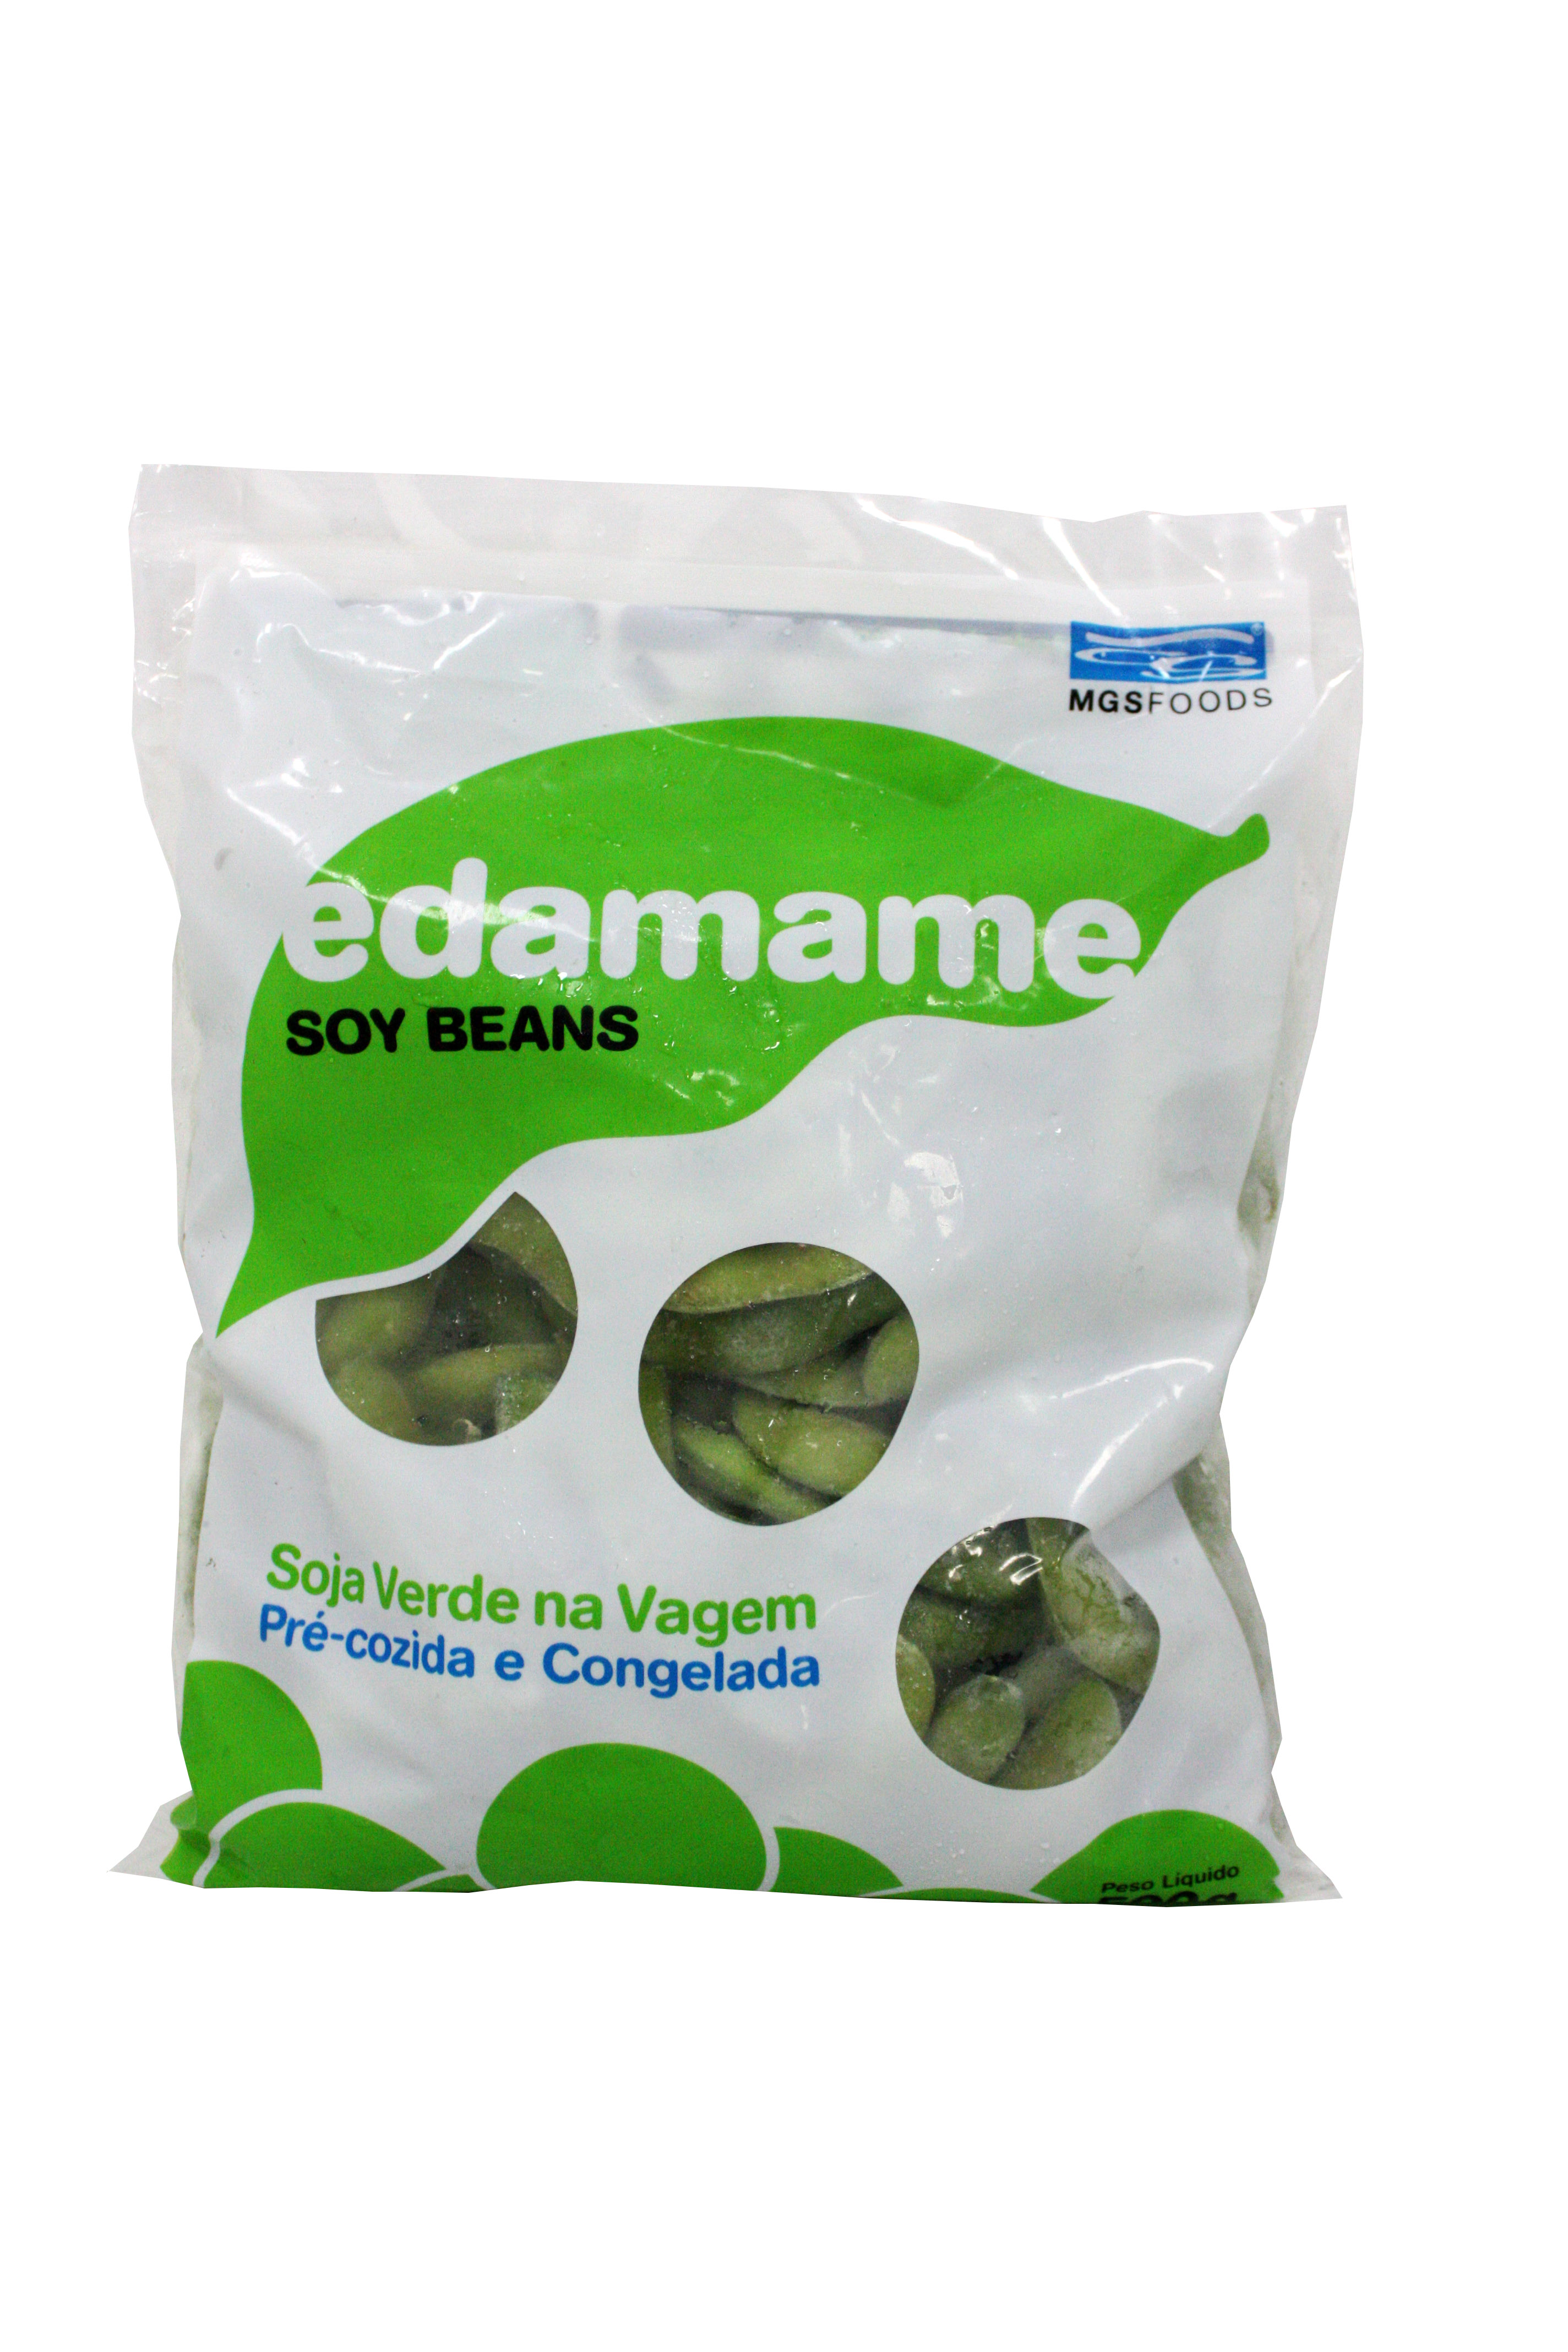 7898303210010 - EDAMAME MGS FOODS CONG